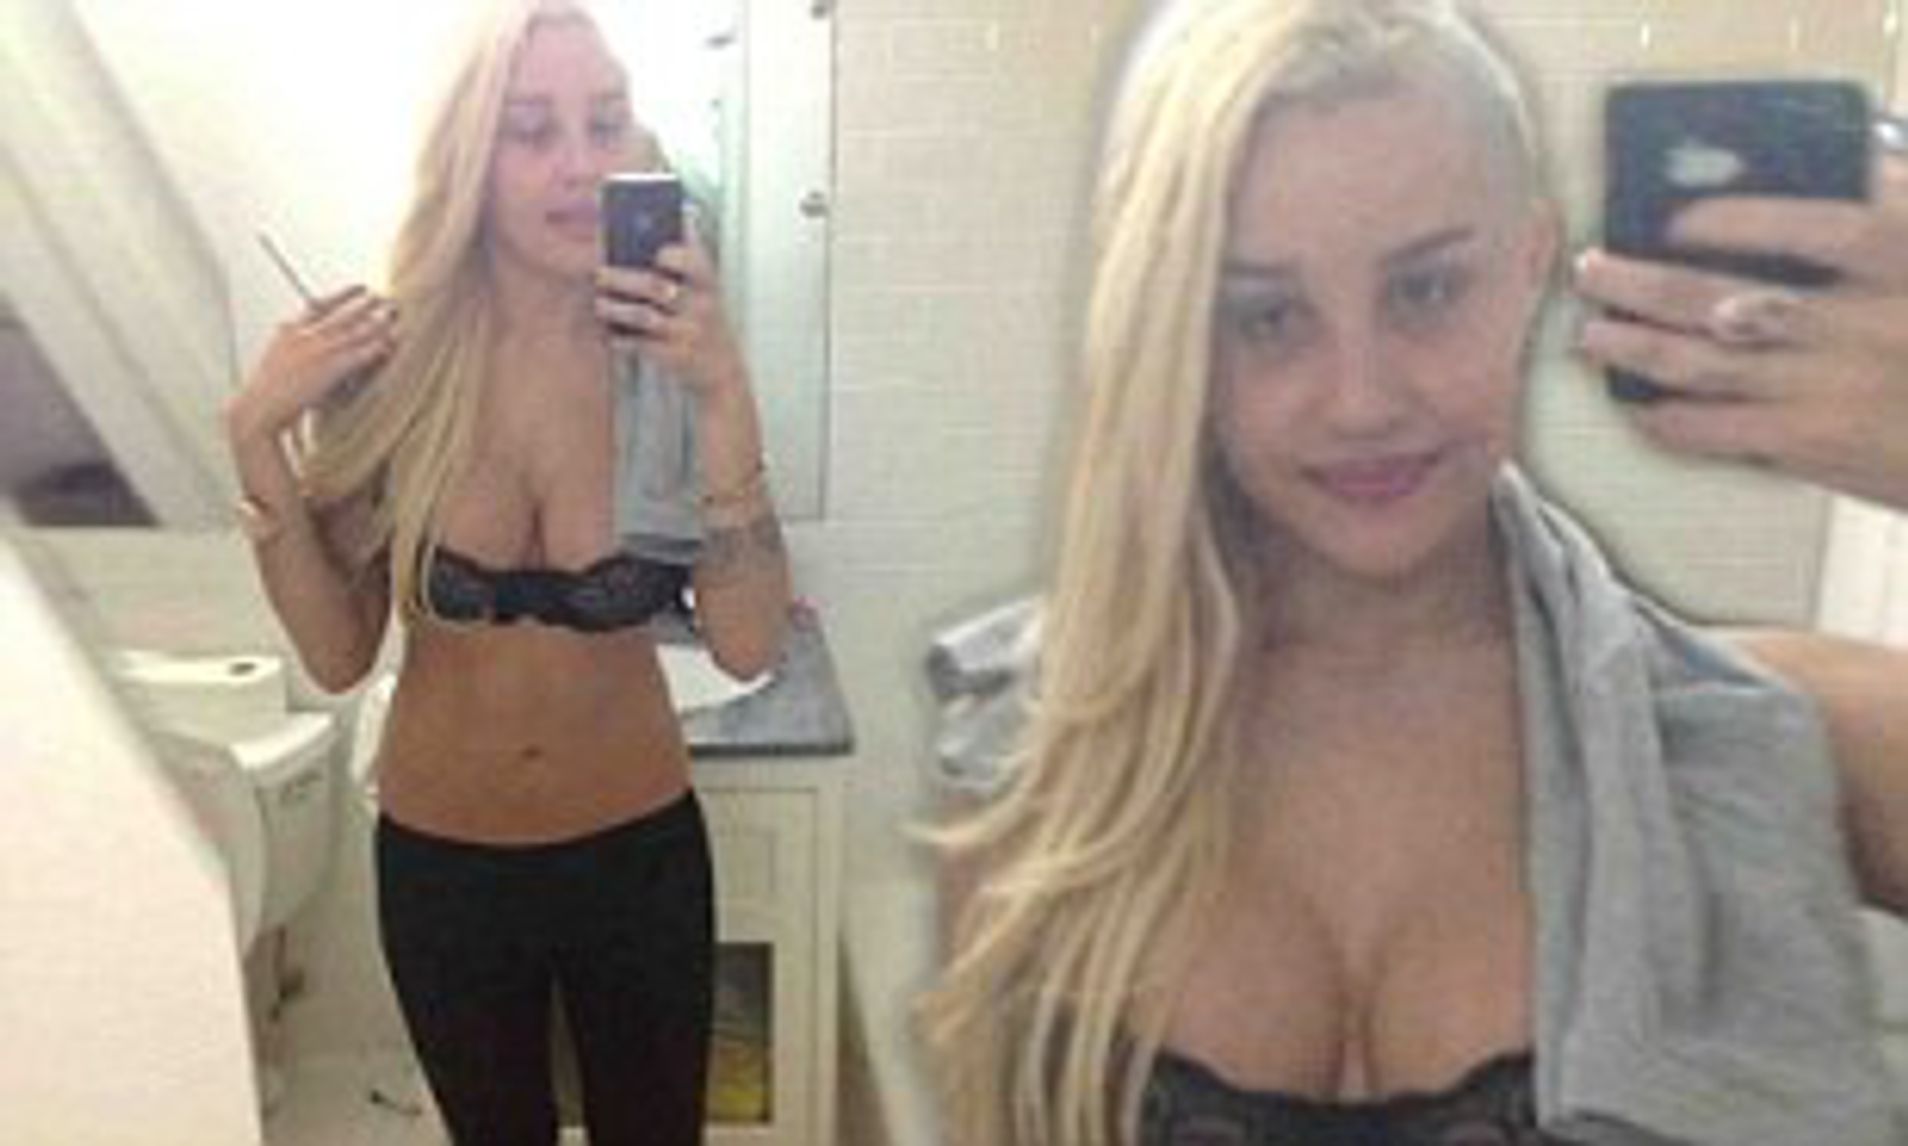 bethany shepard recommends amanda bynes flash pic